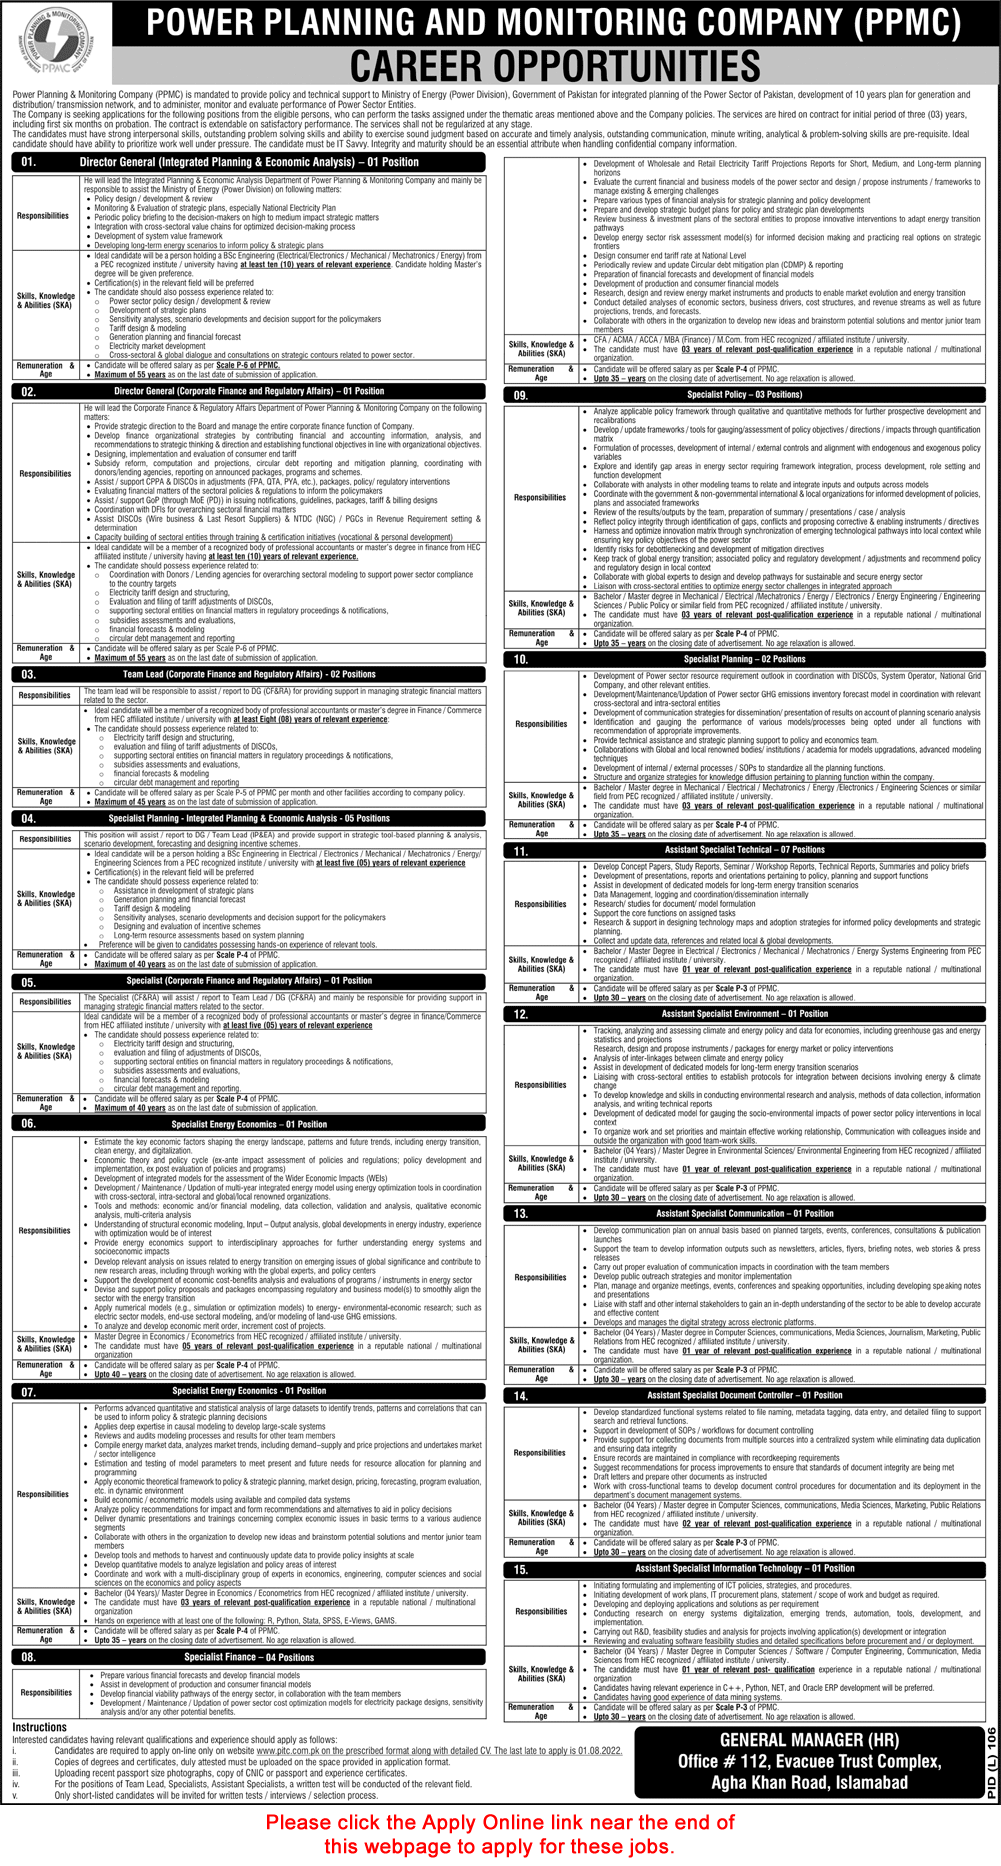 Power Planning and Monitoring Company Jobs 2022 July PPMC Apply Online Assistant Specialists & Others Latest